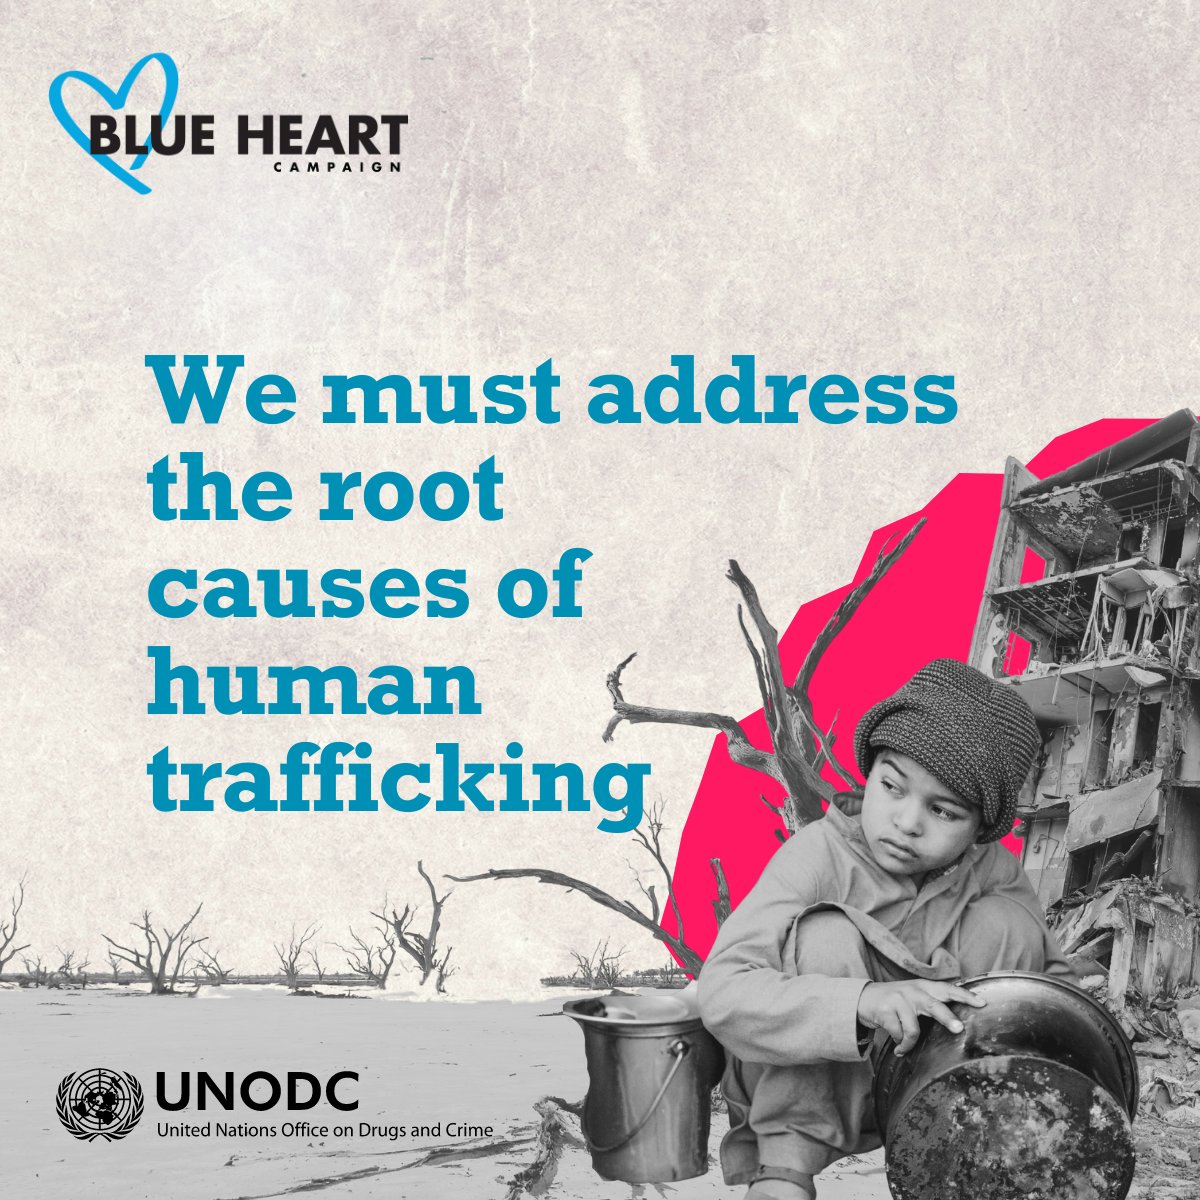 Traffickers target people who ▫️lack legal status ▫️live in poverty ▫️lack access to education, healthcare, decent work ▫️face discrimination, violence, abuse ▫️come from marginalized communities We must address the root causes of human trafficking. #EndHumanTrafficking